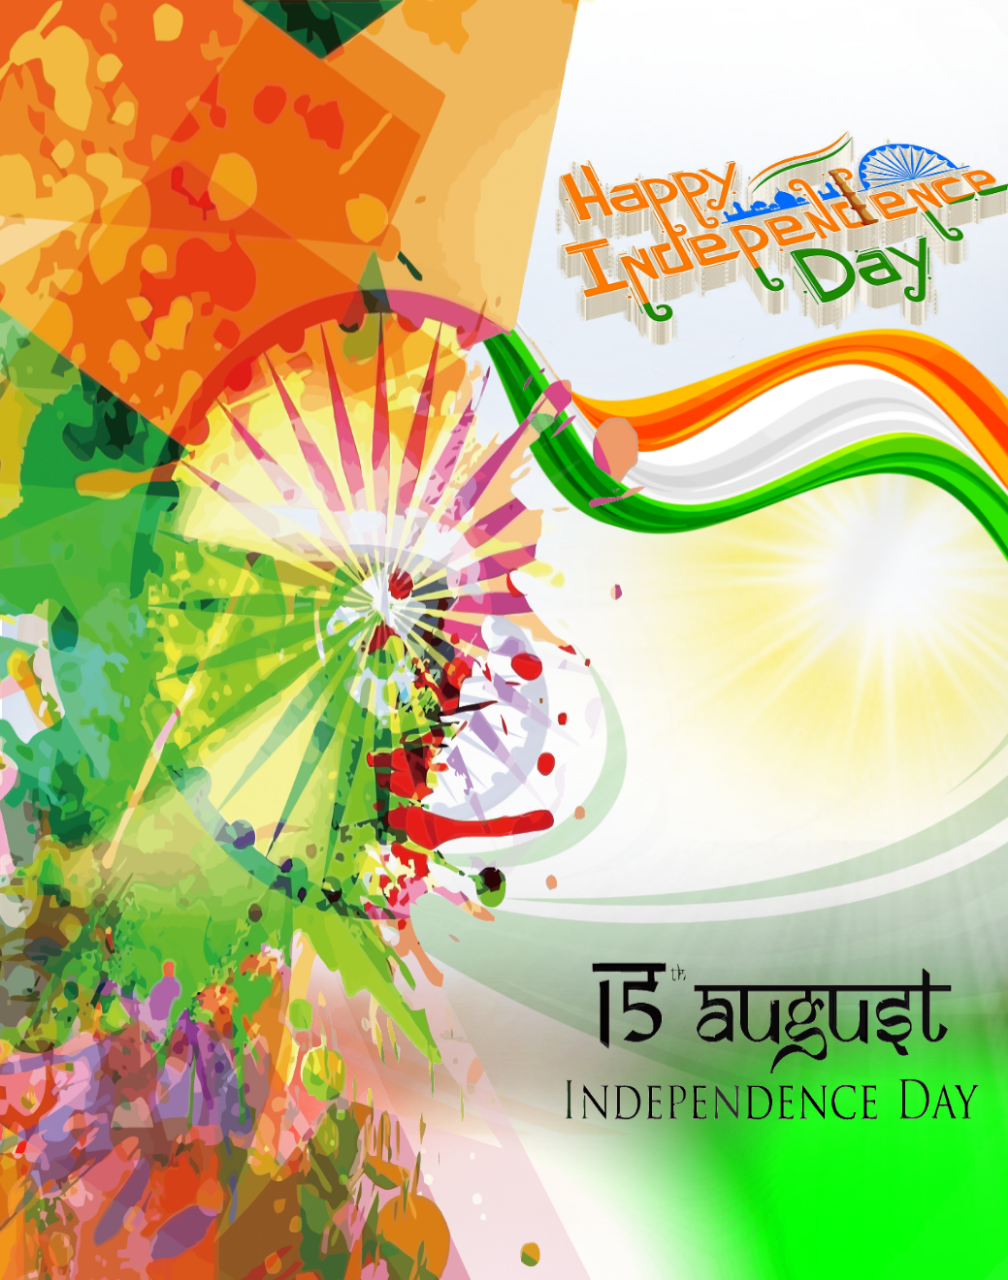 Happy Independence Day Wishes Images & Download 4K Quality